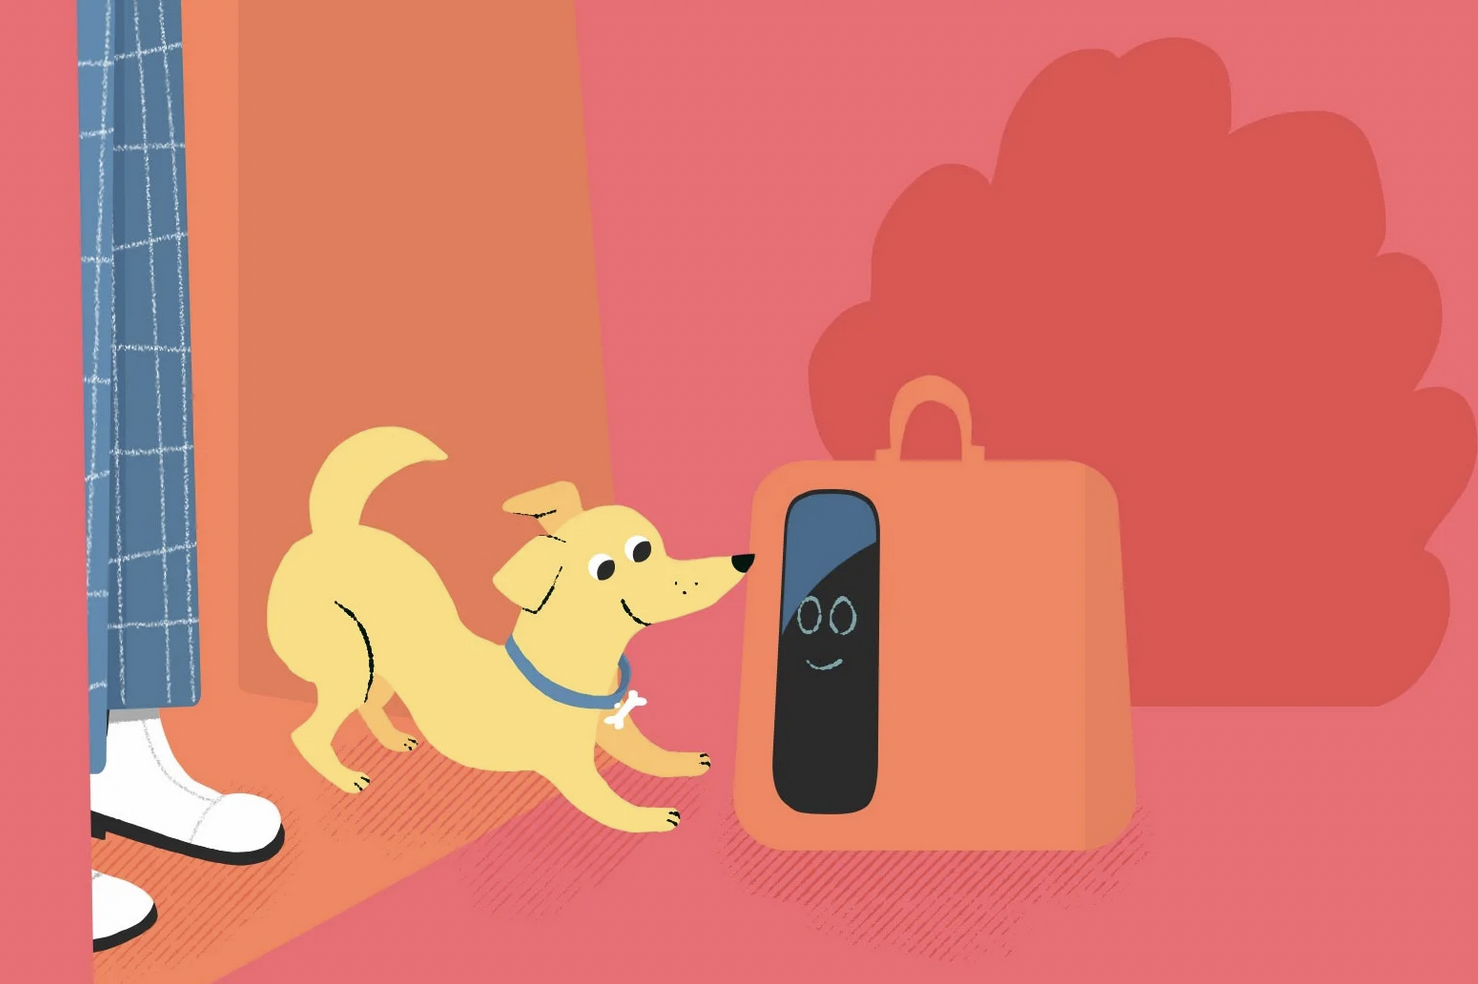 An illustration in vivid, warm colors of a dog happily sniffing an orange cube with a little digital smiley-face on it.